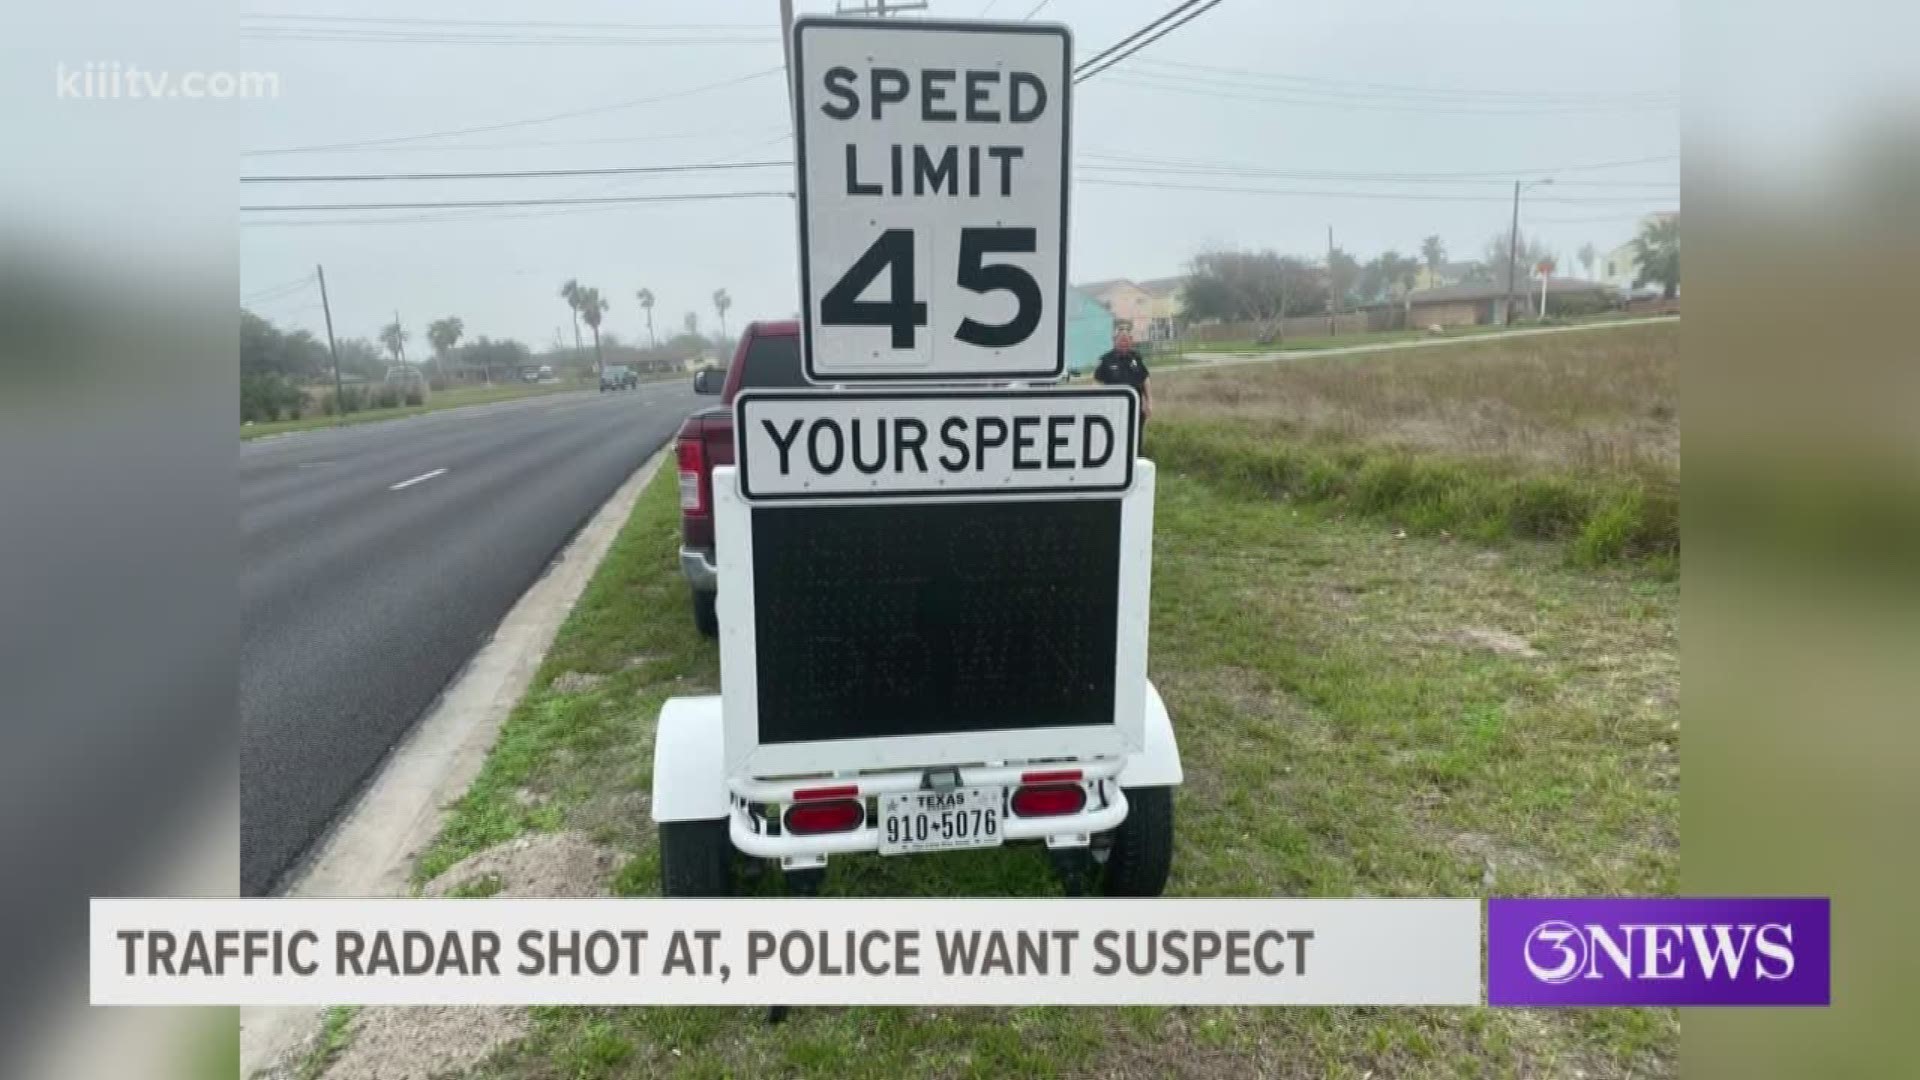 A mobile radar trailer meant to slow traffic down was shot in Aransas Pass.